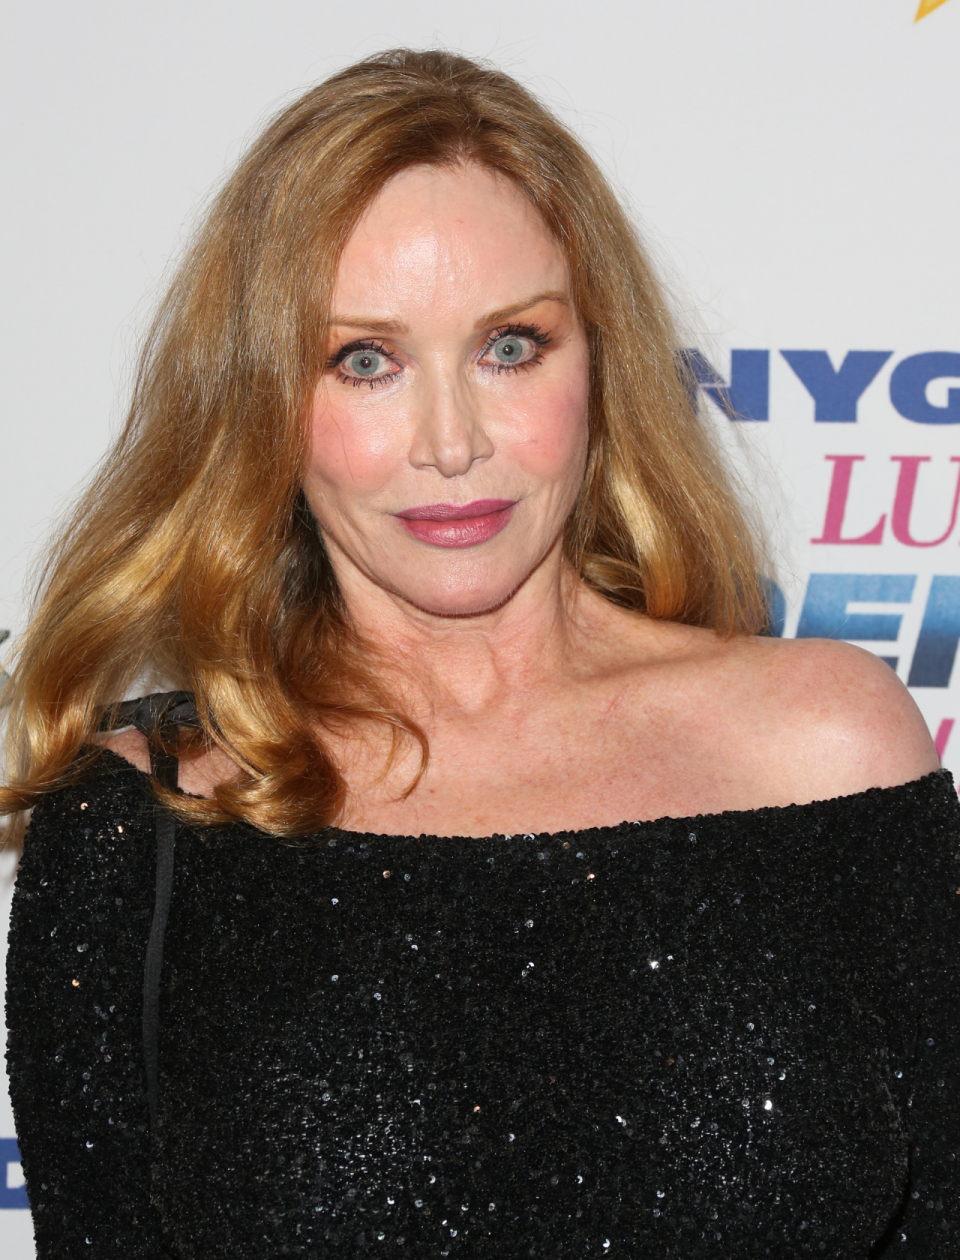 Tanya Roberts attends the 27th Annual Night of 100 Stars in Pacific Palisades, CA 2017.  She passed in 2021.